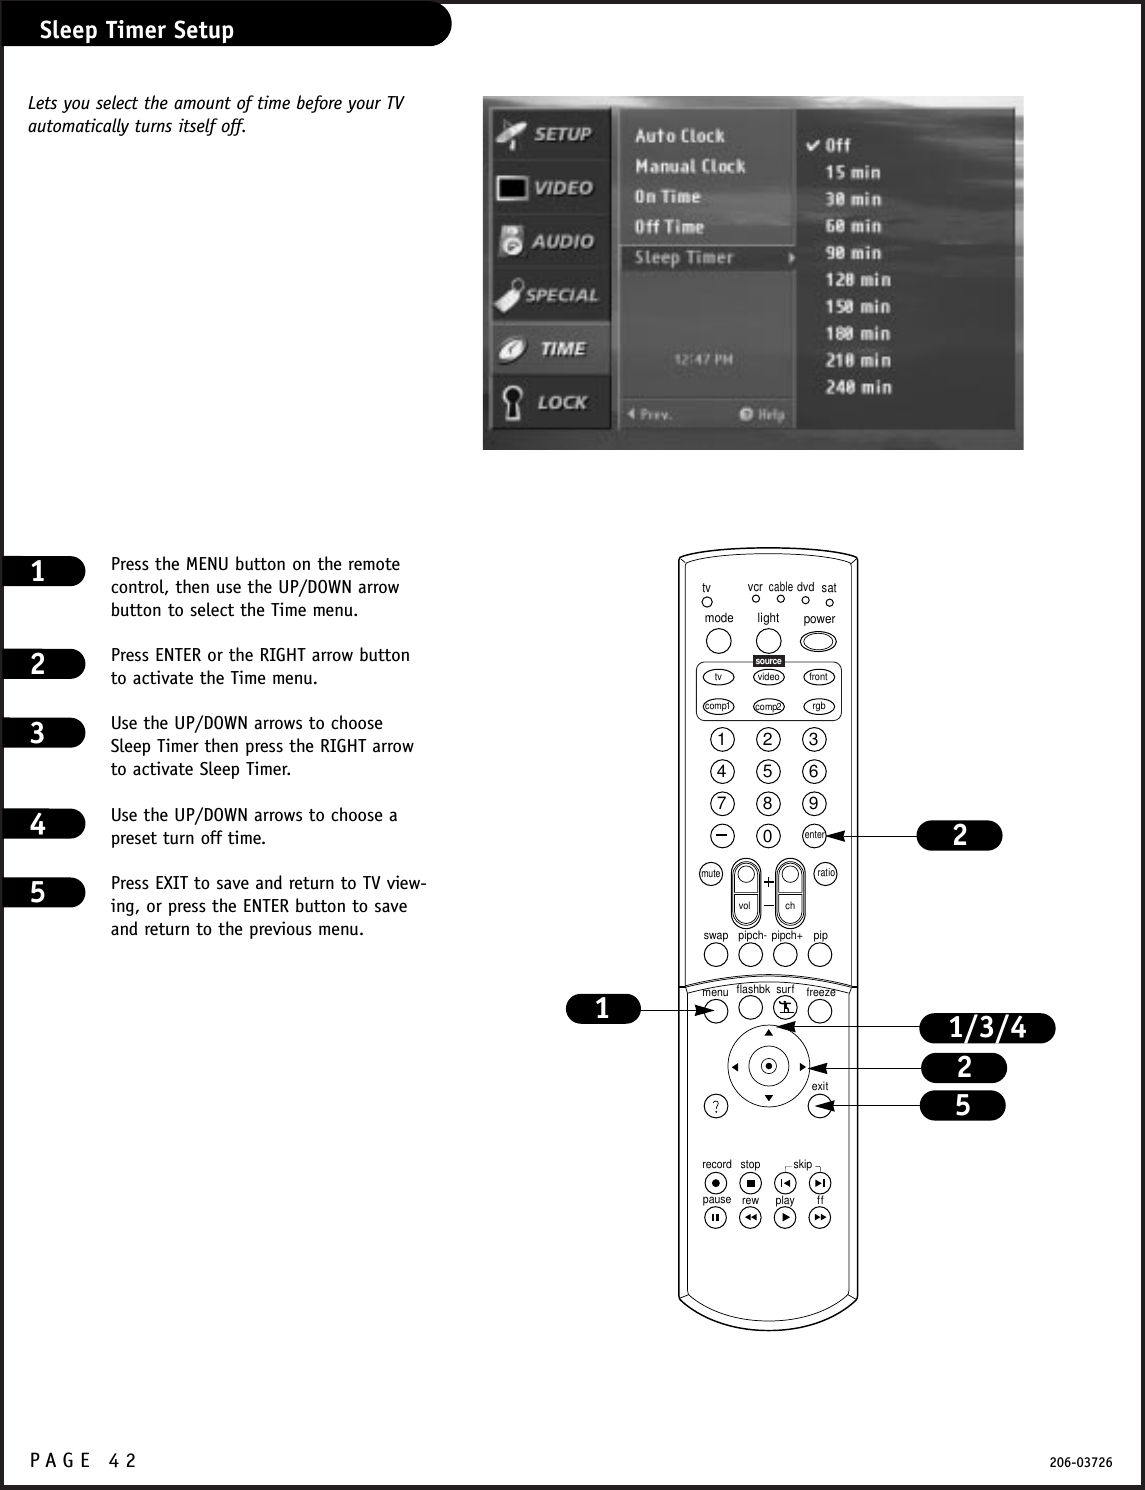 P A GE 42 206-03726Sleep Timer SetupPress the MENU button on the remotecontrol, then use the UP/DOWN arrowbutton to select the Time menu.Press ENTER or the RIGHT arrow buttonto activate the Time menu.Use the UP/DOWN arrows to chooseSleep Timer then press the RIGHT arrowto activate Sleep Timer.Use the UP/DOWN arrows to choose apreset turn off time.Press EXIT to save and return to TV view-ing, or press the ENTER button to saveand return to the previous menu.12341234567890tvmode light power   tv video frontcomp1 rgbvcrcabledvdsatmuteswap pipch- pipch+ pipmenurecord stoppause rew play ffexitflashbk surf freezevol chratiocomp2skipsourceenter1/3/4125Lets you select the amount of time before your TV automatically turns itself off.25